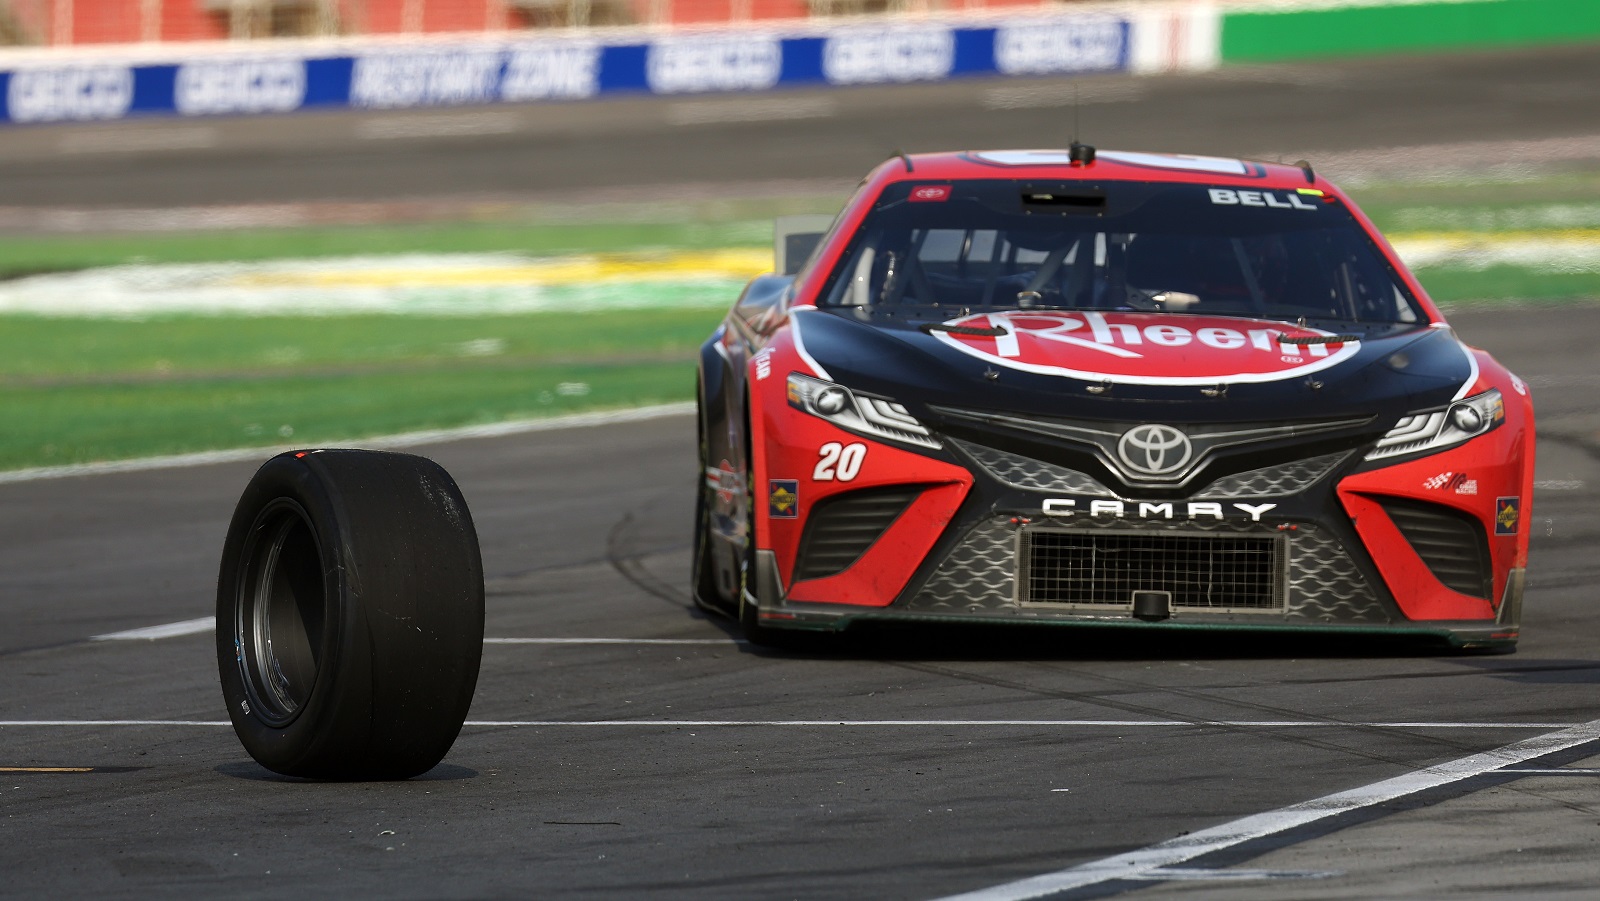 Christopher Bell loses a wheel from the No. 20 Toyota after a pit stop during the NASCAR Cup Series Quaker State 400 at Atlanta Motor Speedway on July 10, 2022.